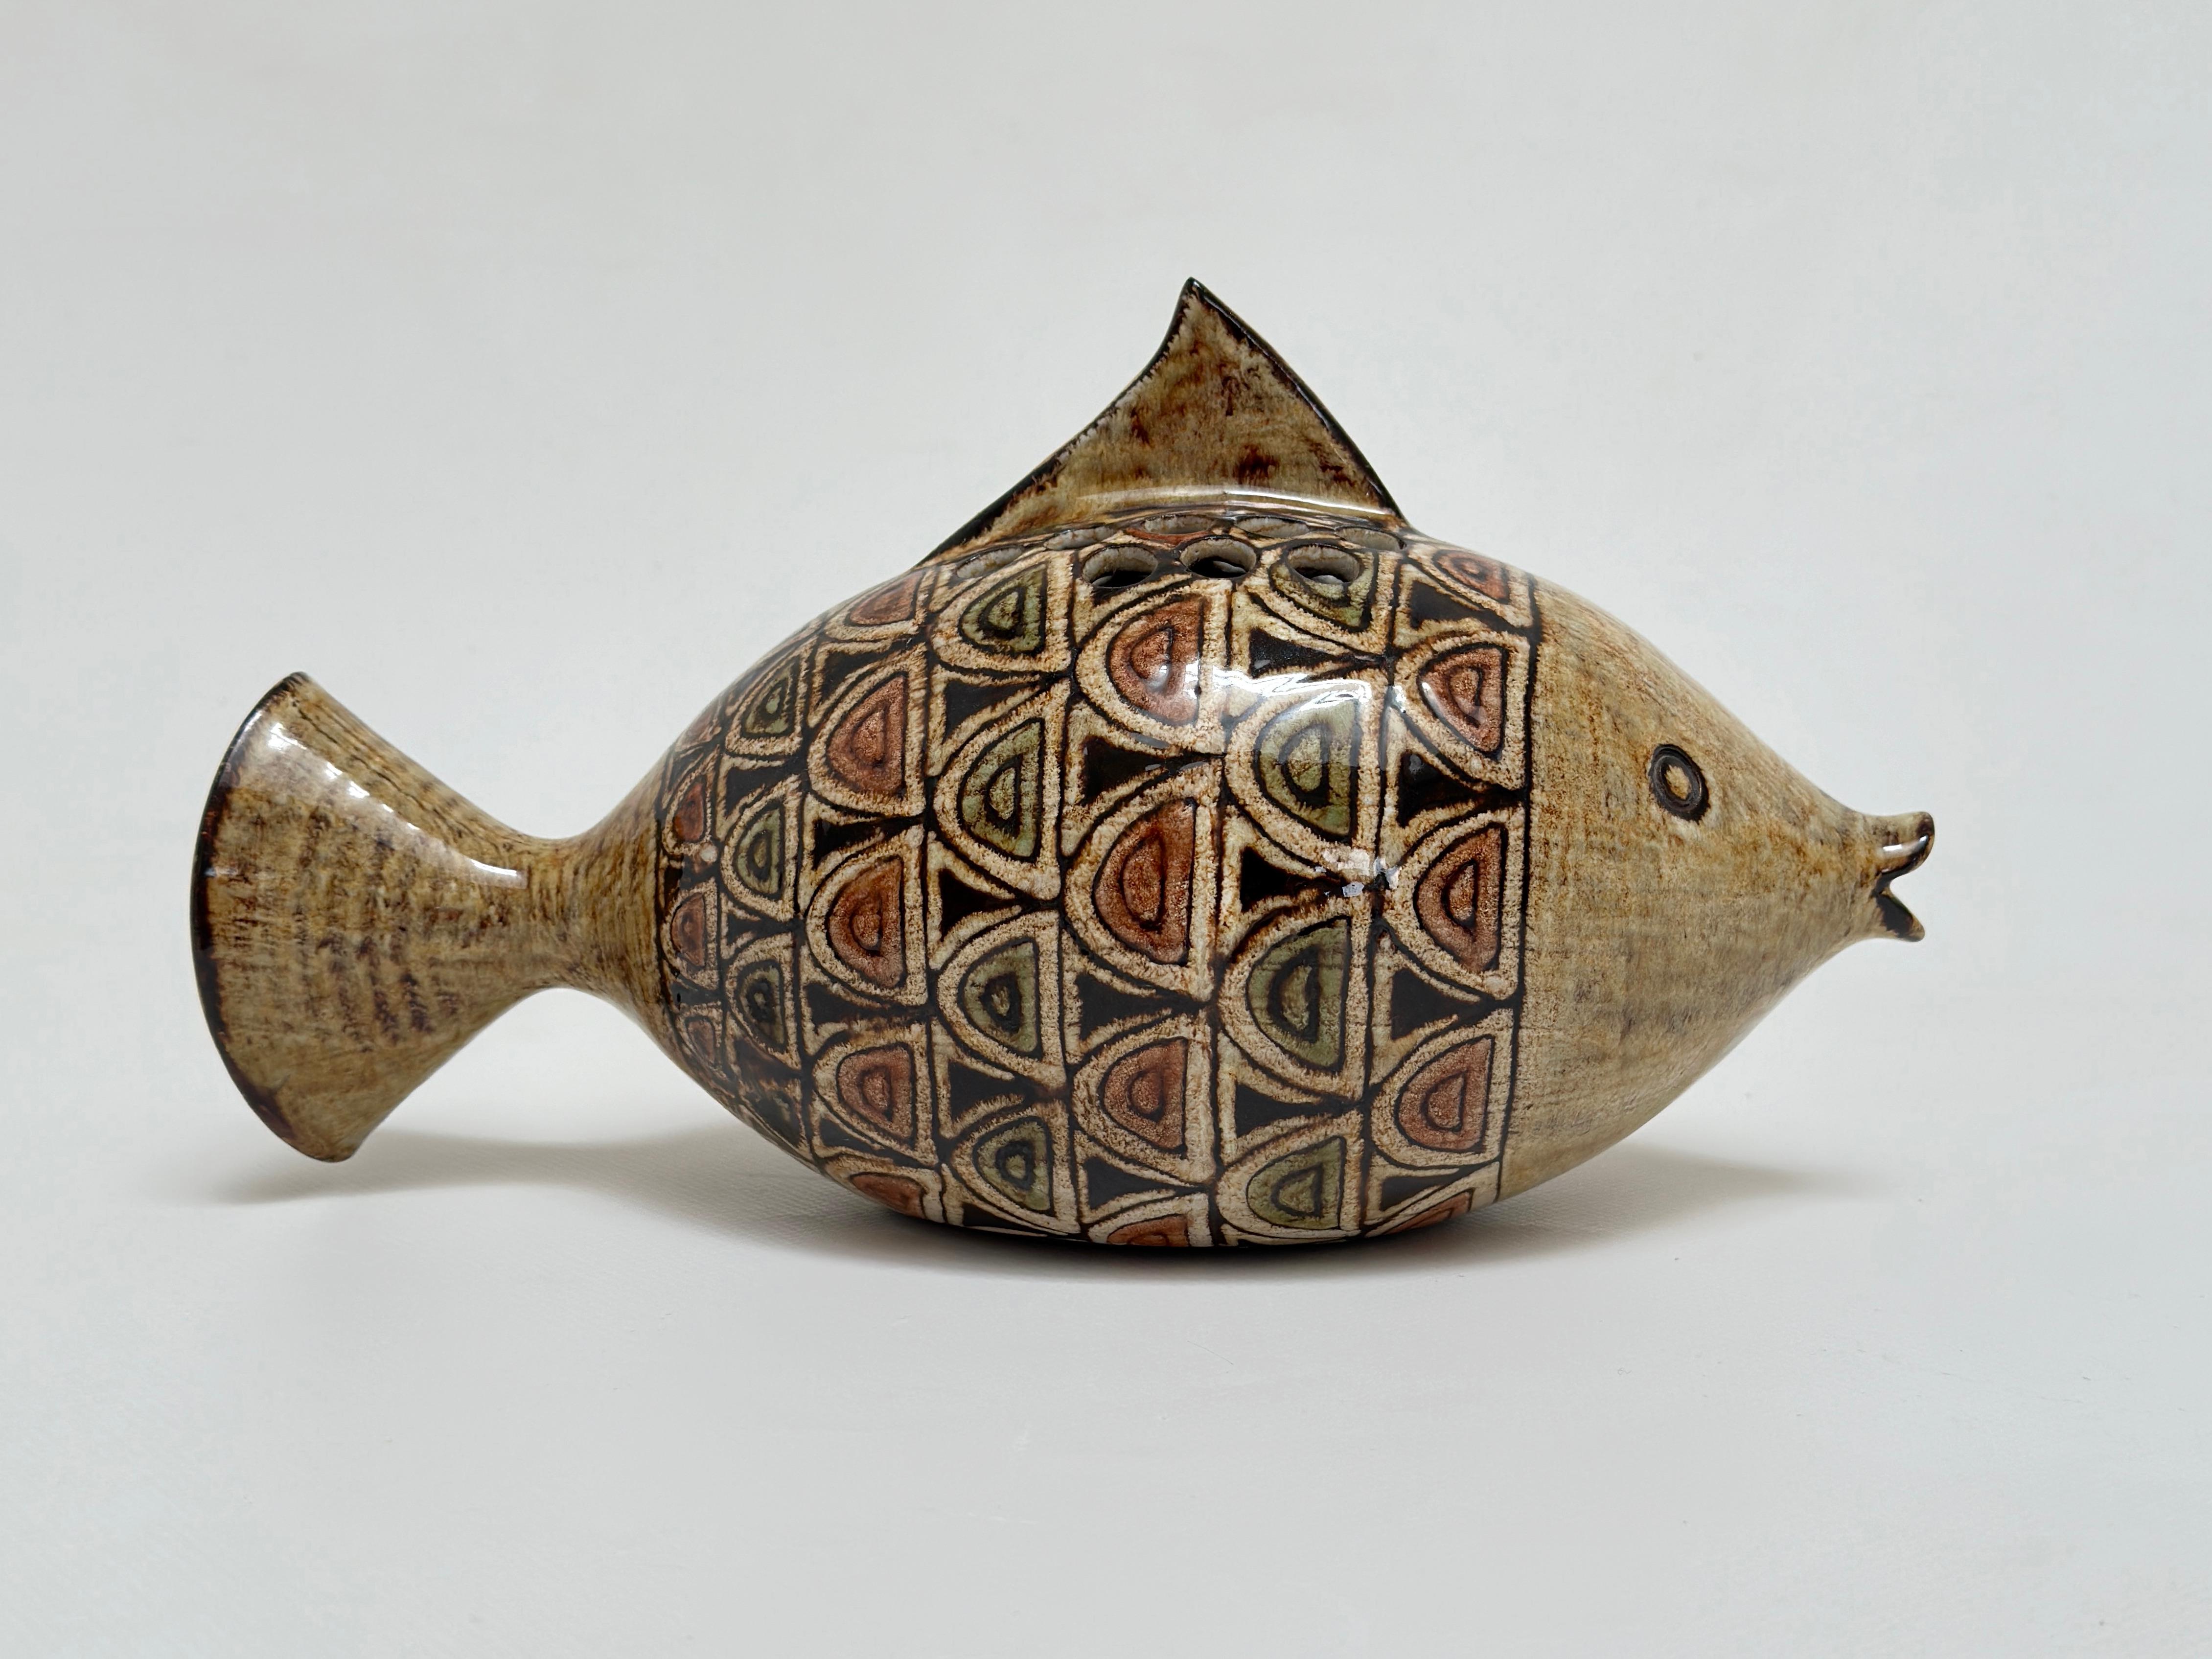 Garden vase in the shape of a fish in red earth from Vallauris, glazes in muted tones and patterns evoking oriental decorative ceramics.

Graduated of the Ecole des Beaux Arts in Reims, Jean-Claude Malarmey joined his classmate Robert Perot in 1954